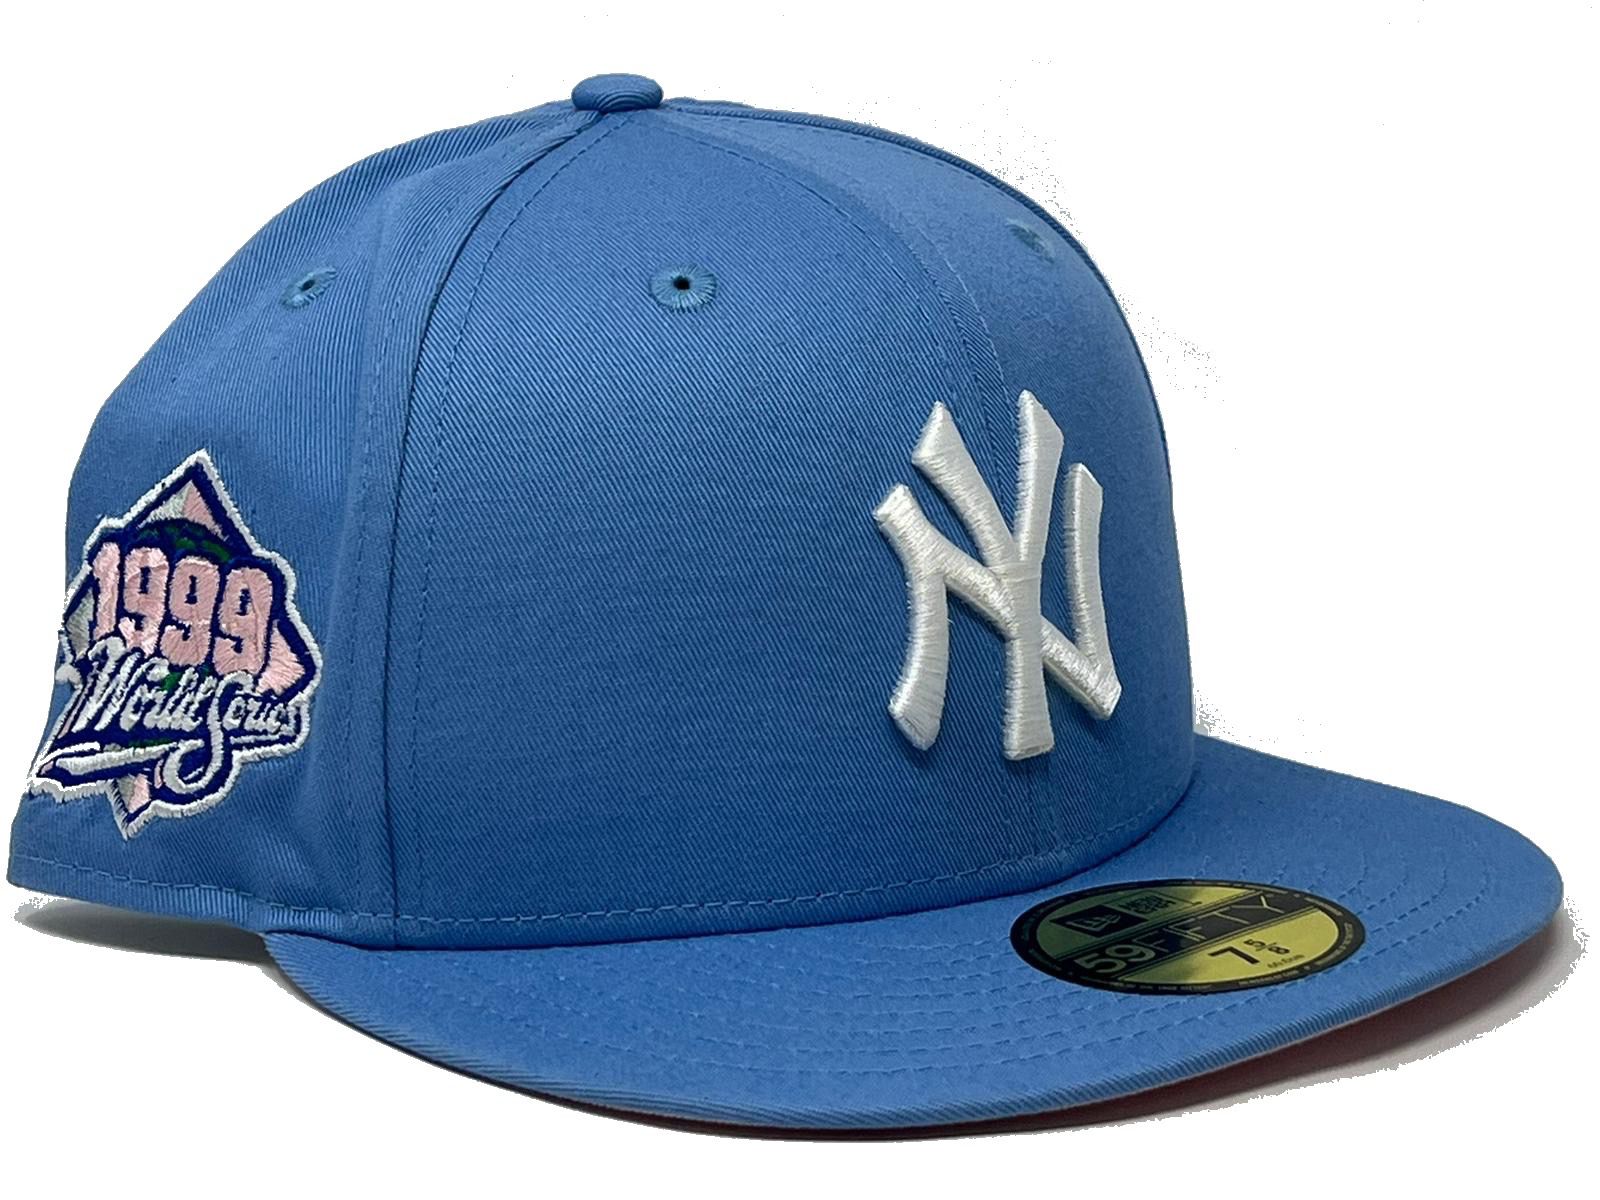 New York Yankees New Era 59FIFTY Fitted Hat - Light Blue